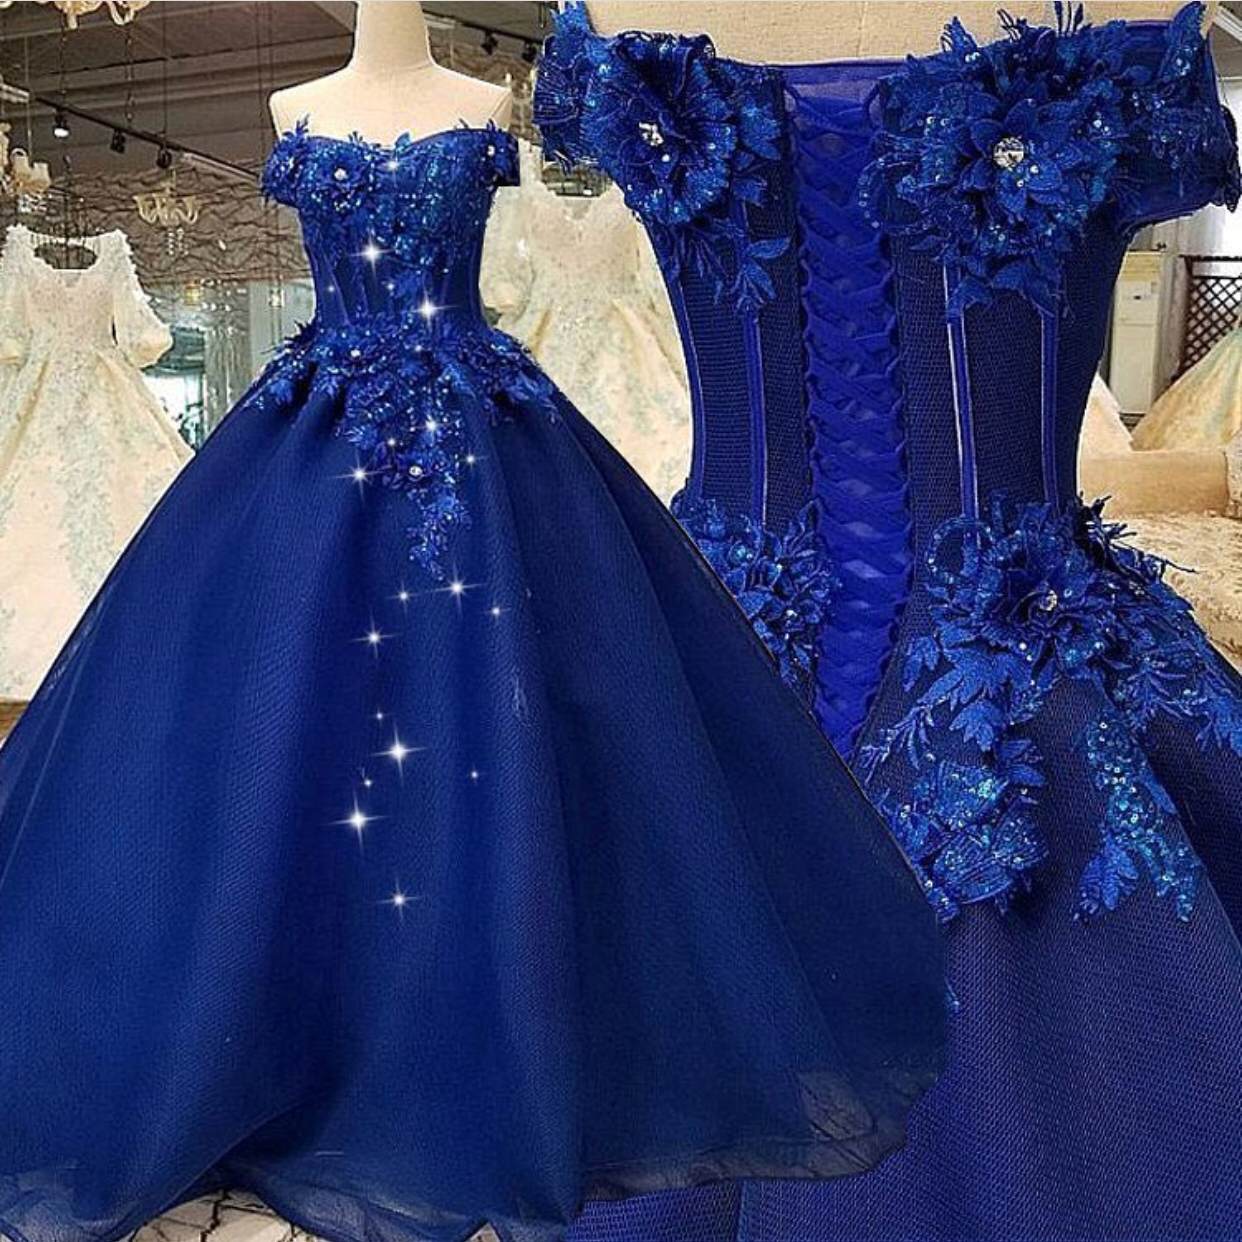 Off The Shoulder Prom Dress, Ball Gown Prom Dress, Royal Blue Prom Dress, Prom Dresses 2020, Lace Applique Prom Dress, Elegant Prom Dress, Prom